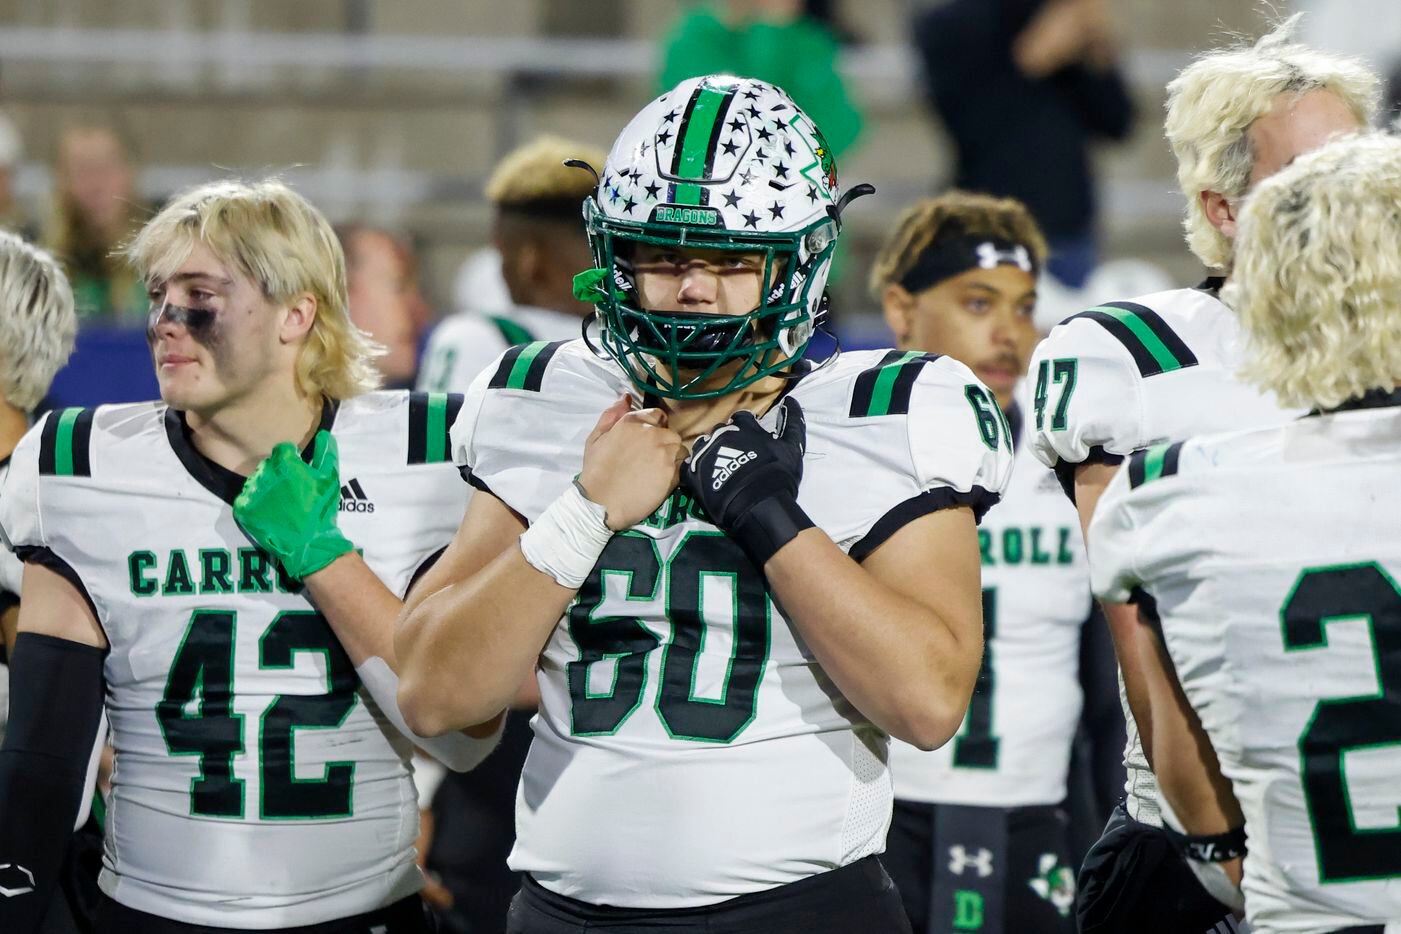 Southlake Carroll offensive lineman Jackson Underwood (60) watches as Duncanville celebrates after their Class 6A Division I state semifinal playoff game at McKinney ISD Stadium in McKinney, Texas, Saturday, Dec. 11, 2021. Duncanville defeated Southlake Carroll 35-9. (Elias Valverde II/The Dallas Morning News)